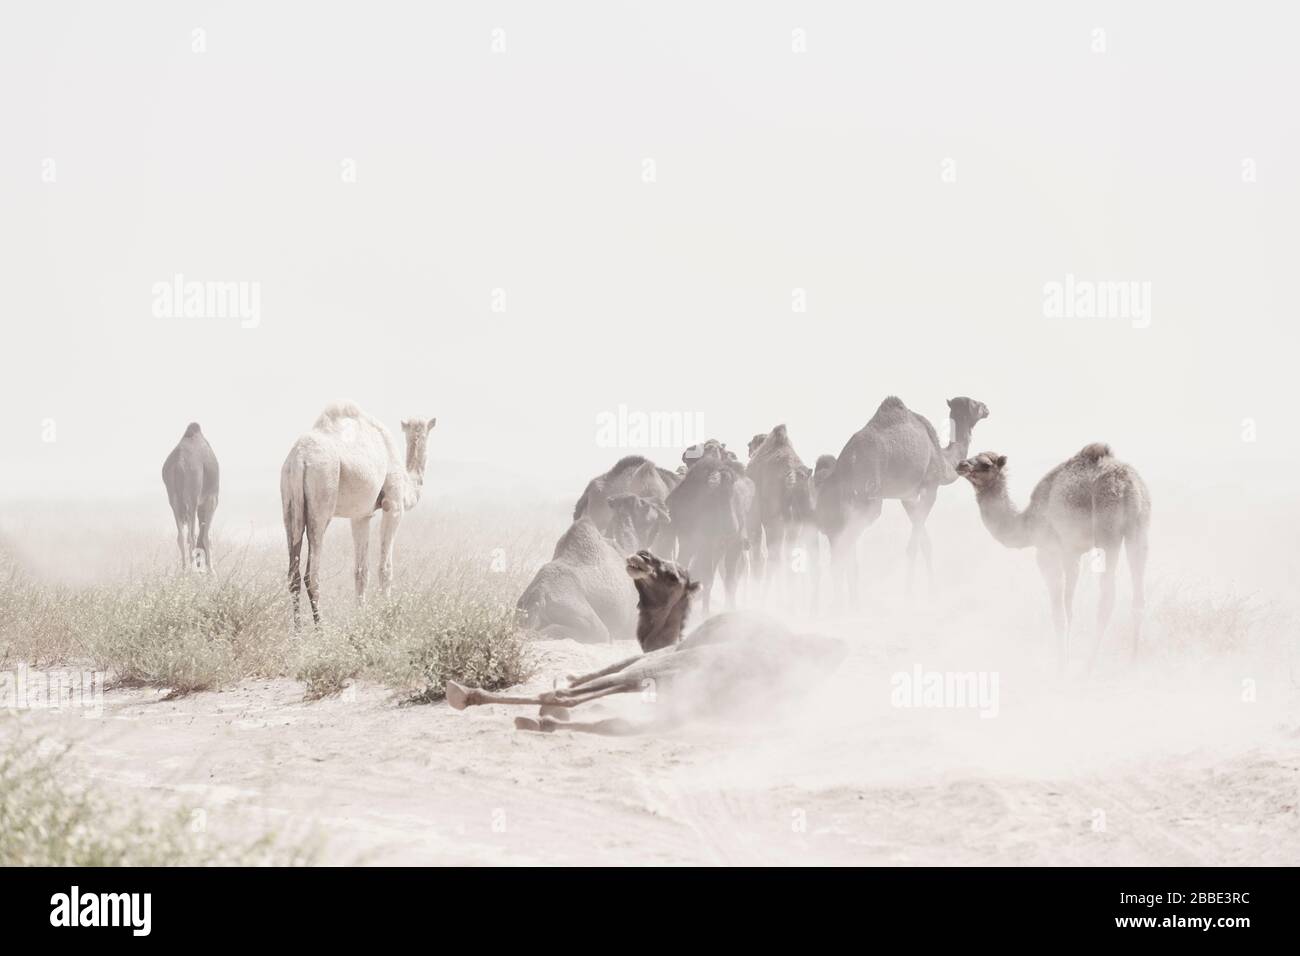 Camels (dromedaries) during sand storm in the Sahara desert, Mhamid, Morocco. High key image with muted colors. Stock Photo